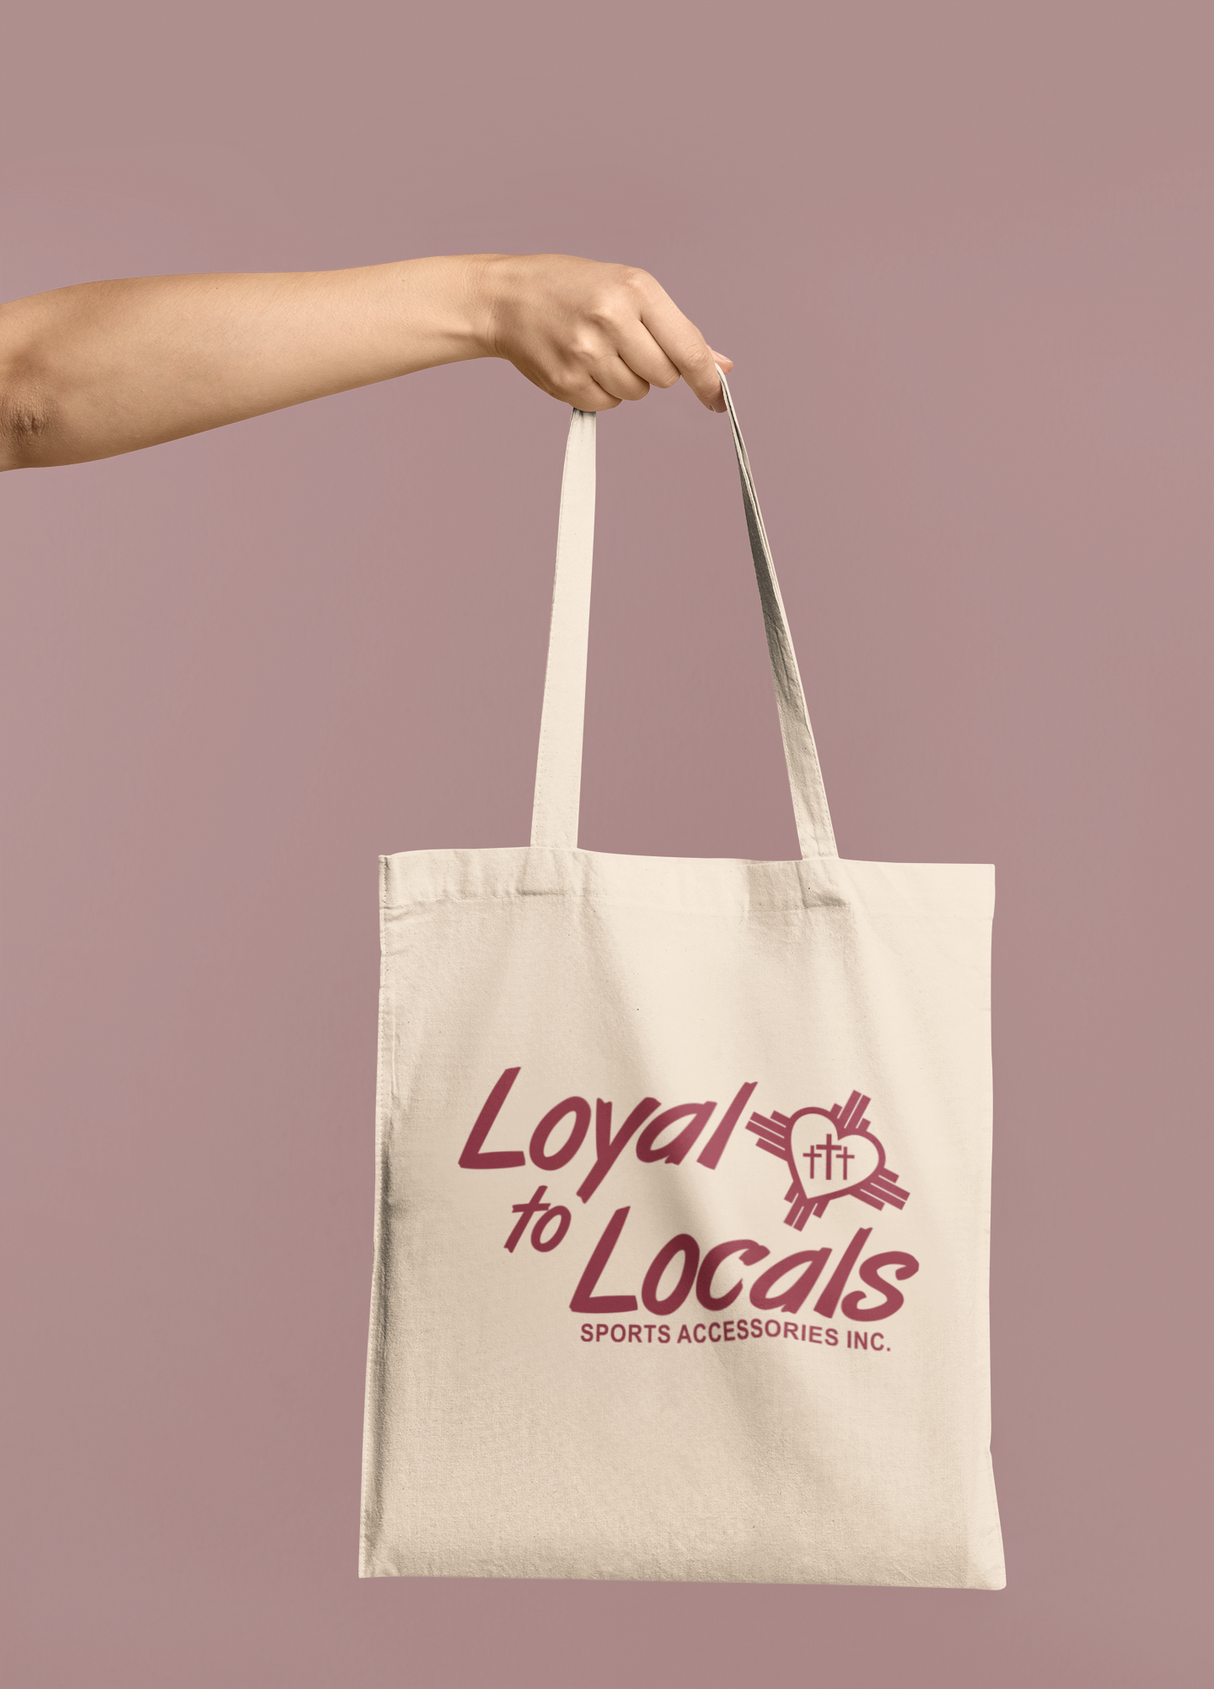 Loyal to Locals Canvas Tote Bag